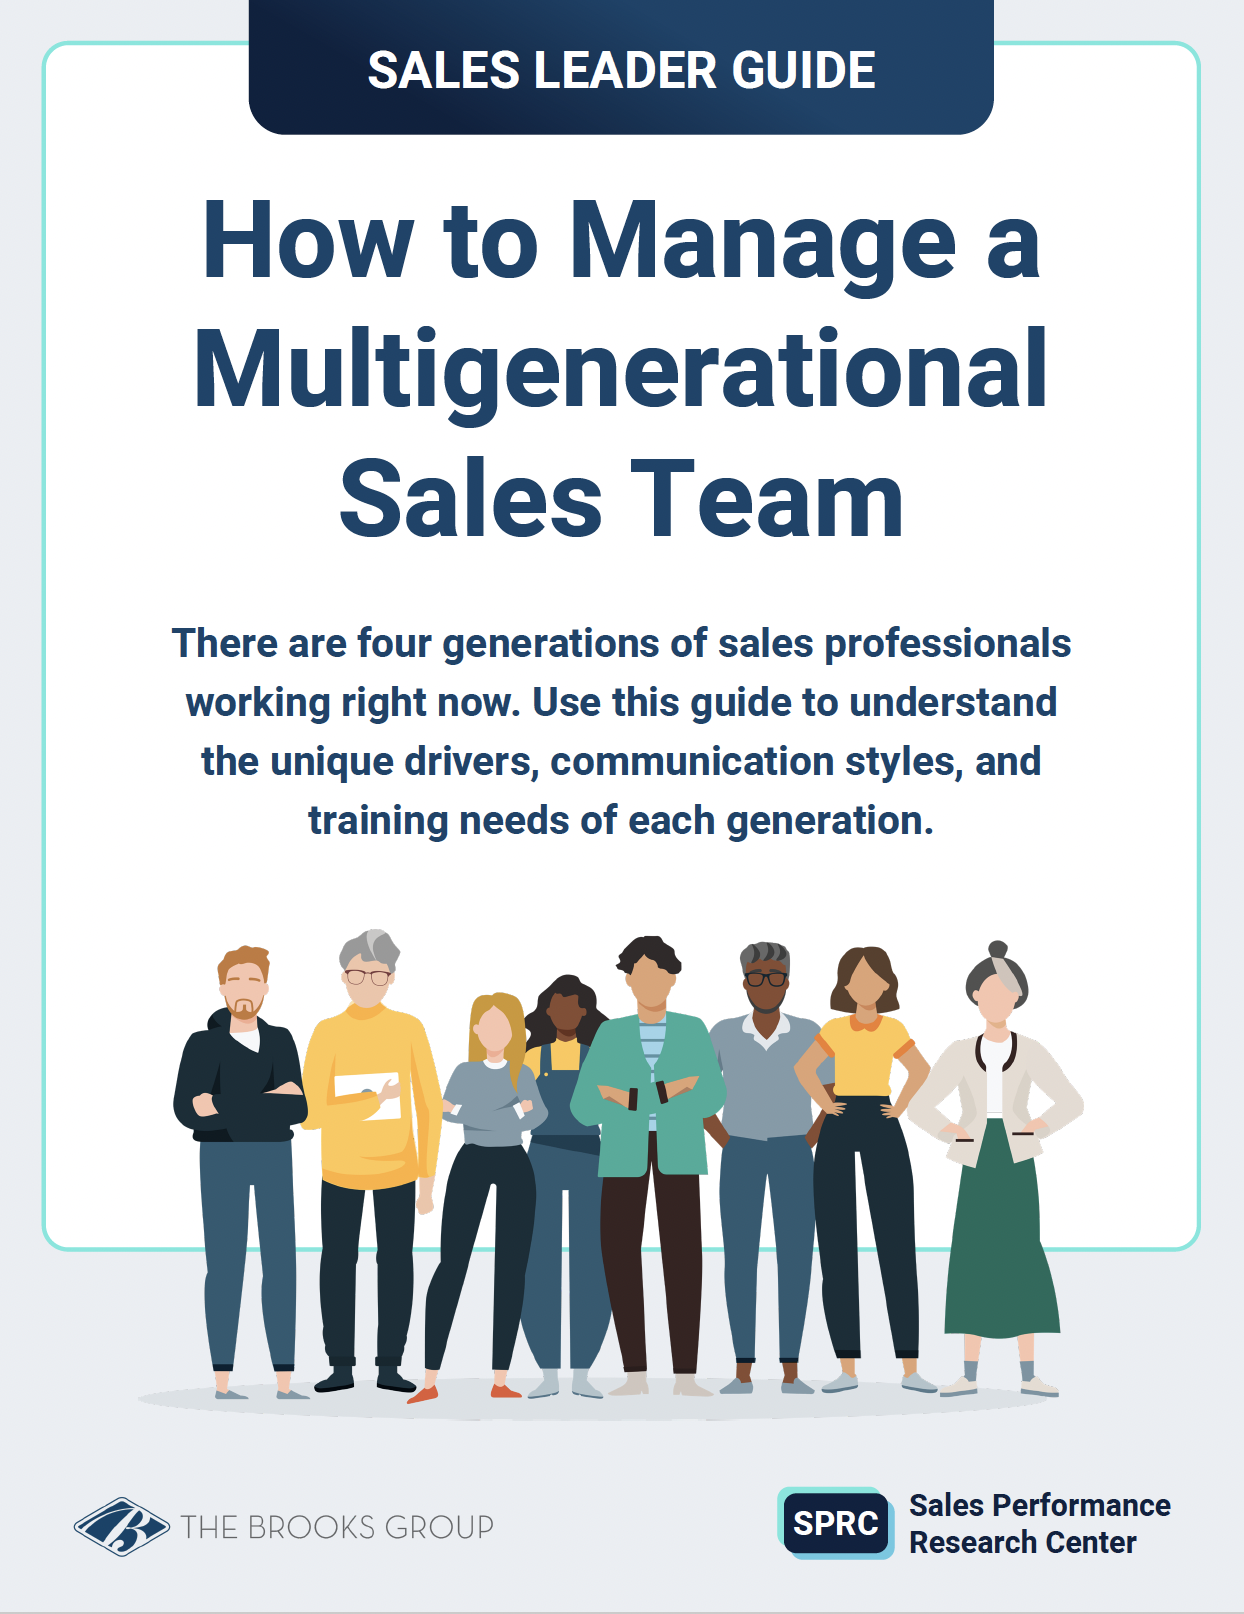 How to Manage a Multigenerational Sales Team Sales Leader Guide